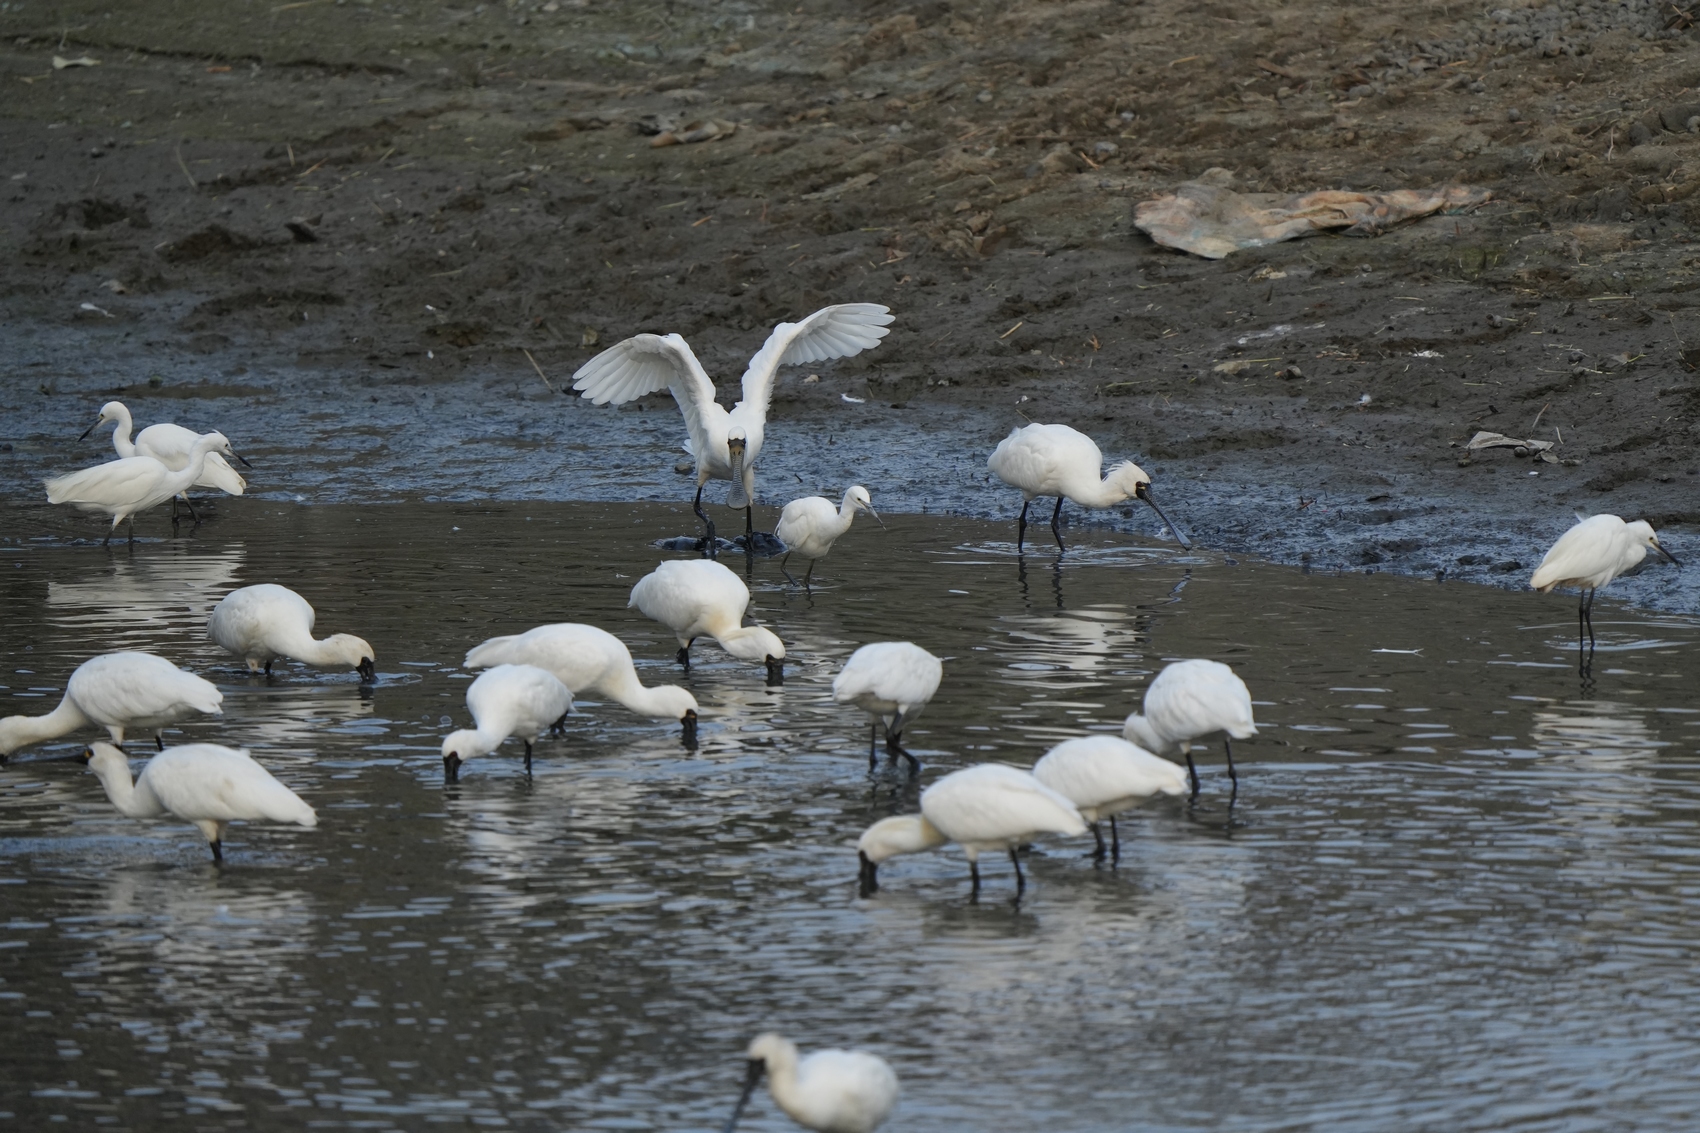 black-faced spoonbills, a large wading bird species endangered, stay in a pond in San Tin. Photo: Hong Kong Bird Watching Society (HKBWS).